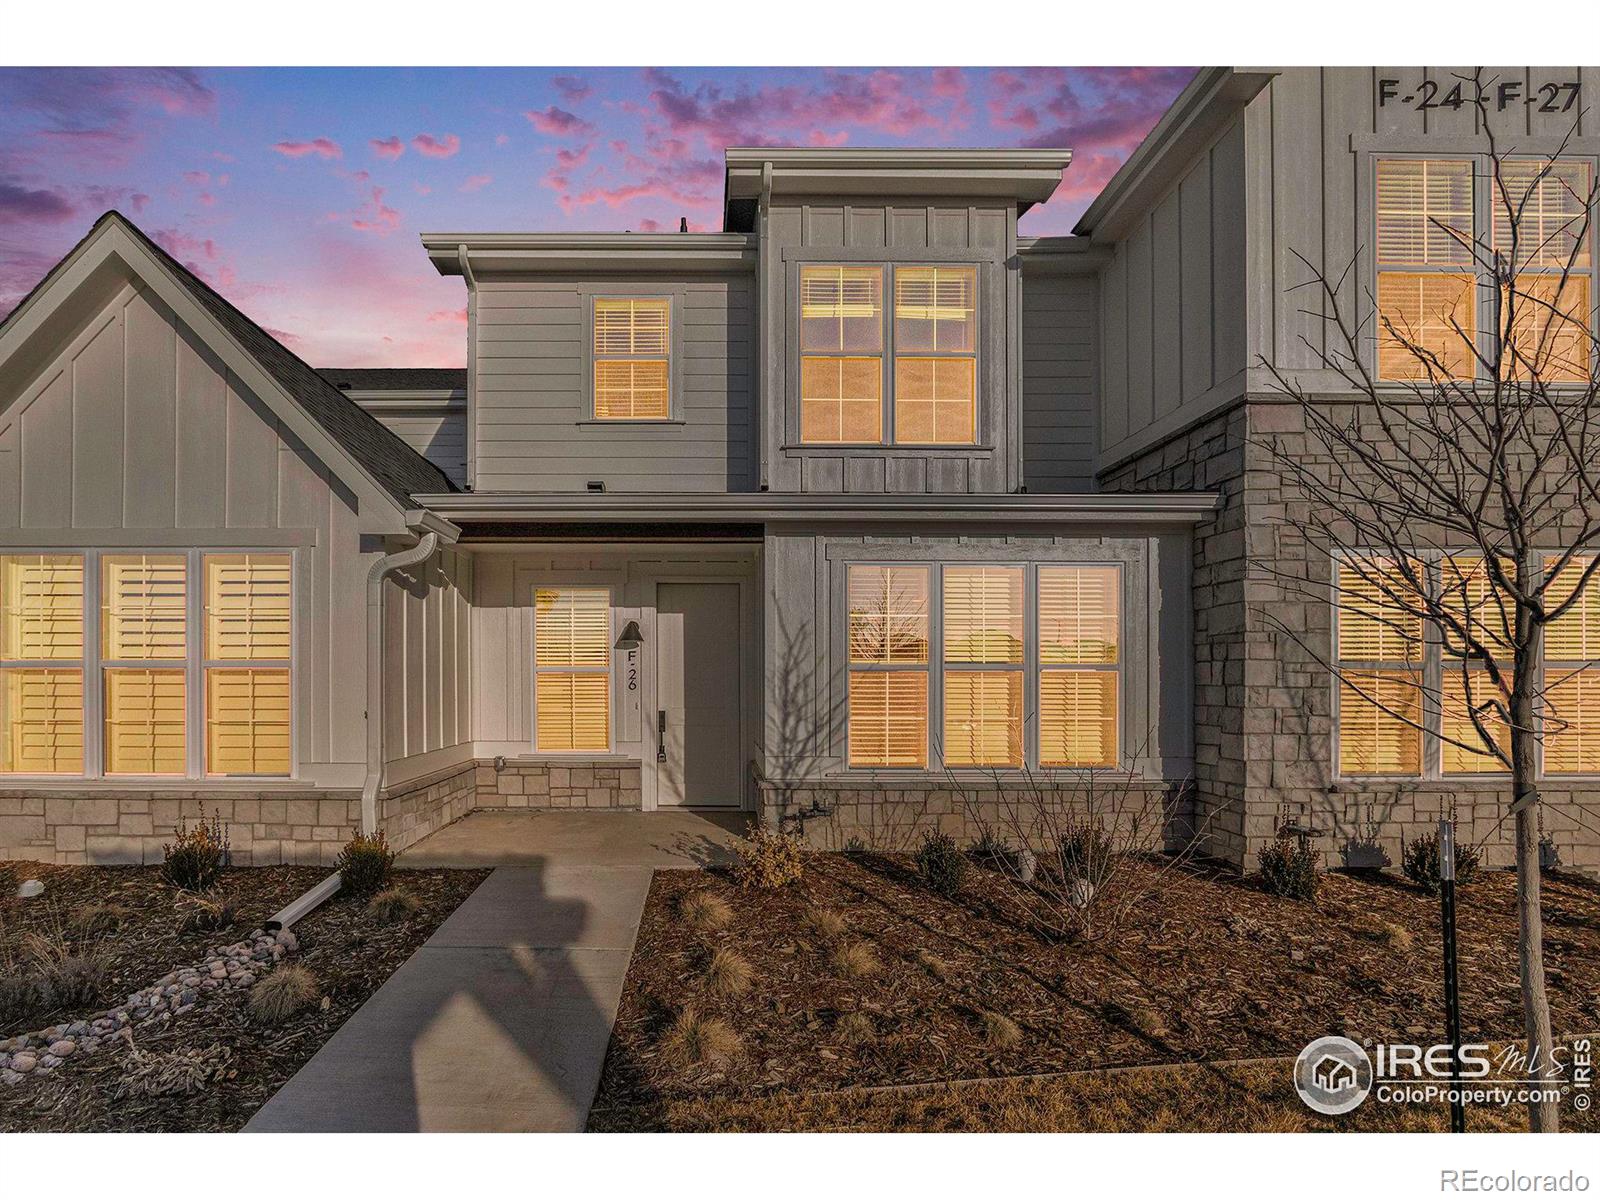 3045 E Trilby Road, fort collins MLS: 4567891006386 Beds: 3 Baths: 3 Price: $519,000